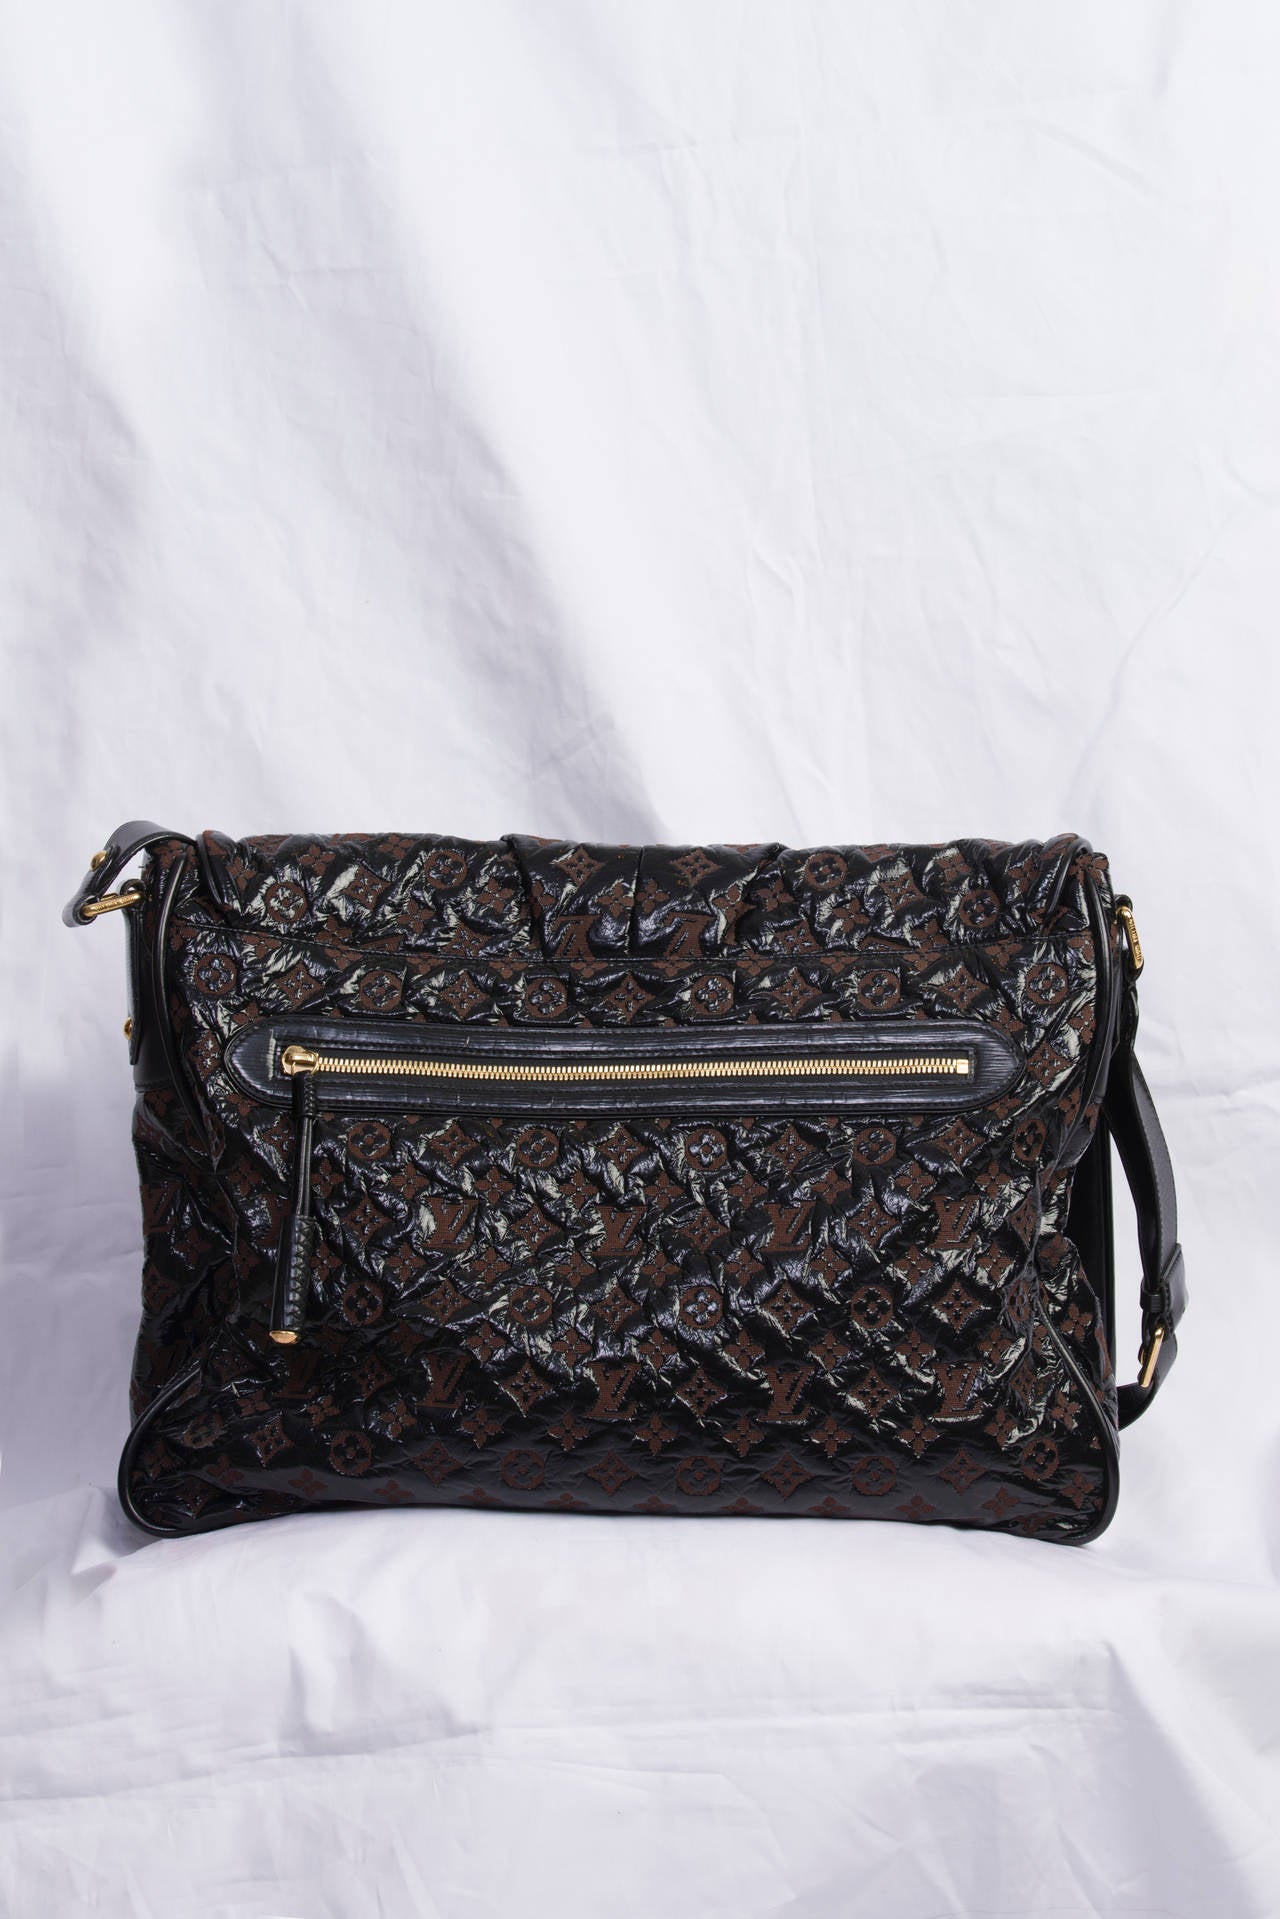 This is an authentic LOUIS VUITTON Vinyl Monogram Squichy, also called Squishy, Inventeur Messenger Bag in Black. This stylish shoulder bag is crafted of soft and durable vinyl with an embossed Louis Vuitton monogram. The bag features a long leather